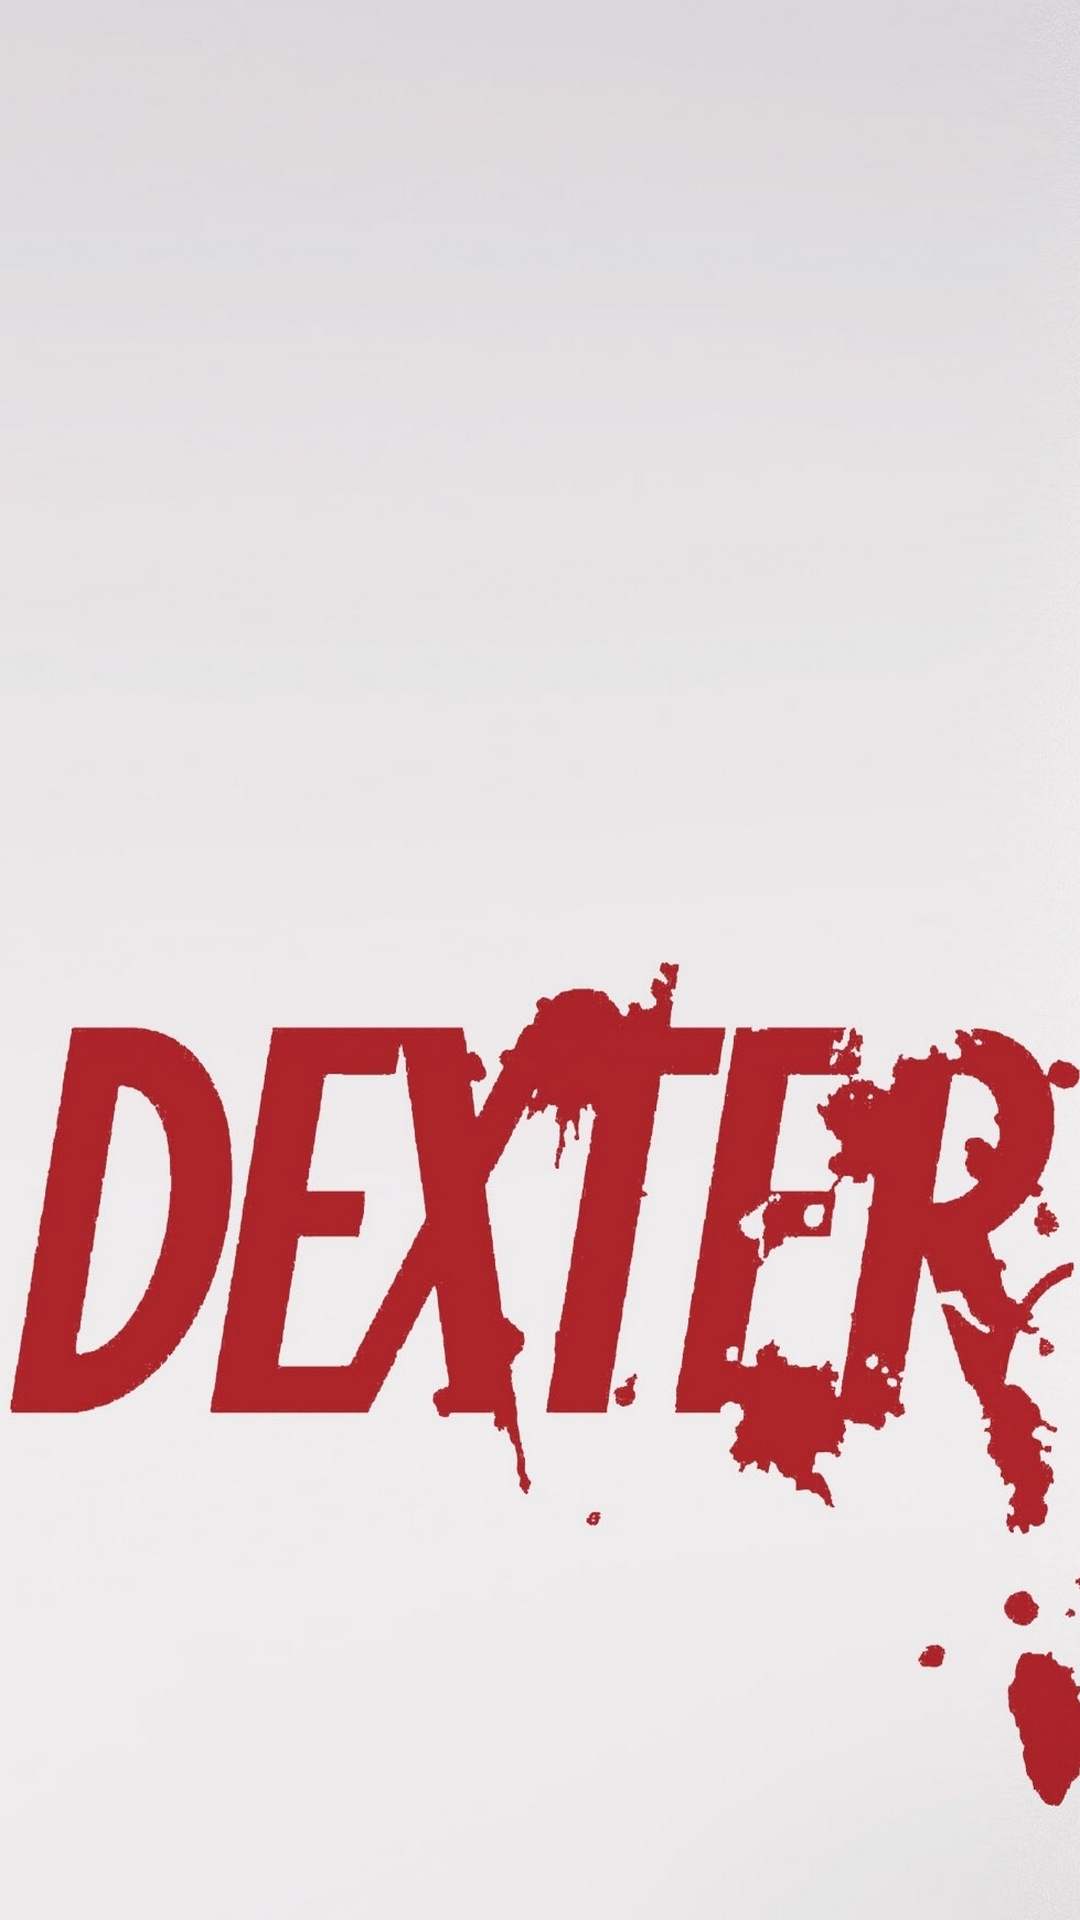 Dexter Series Logo Android Wallpaper free download